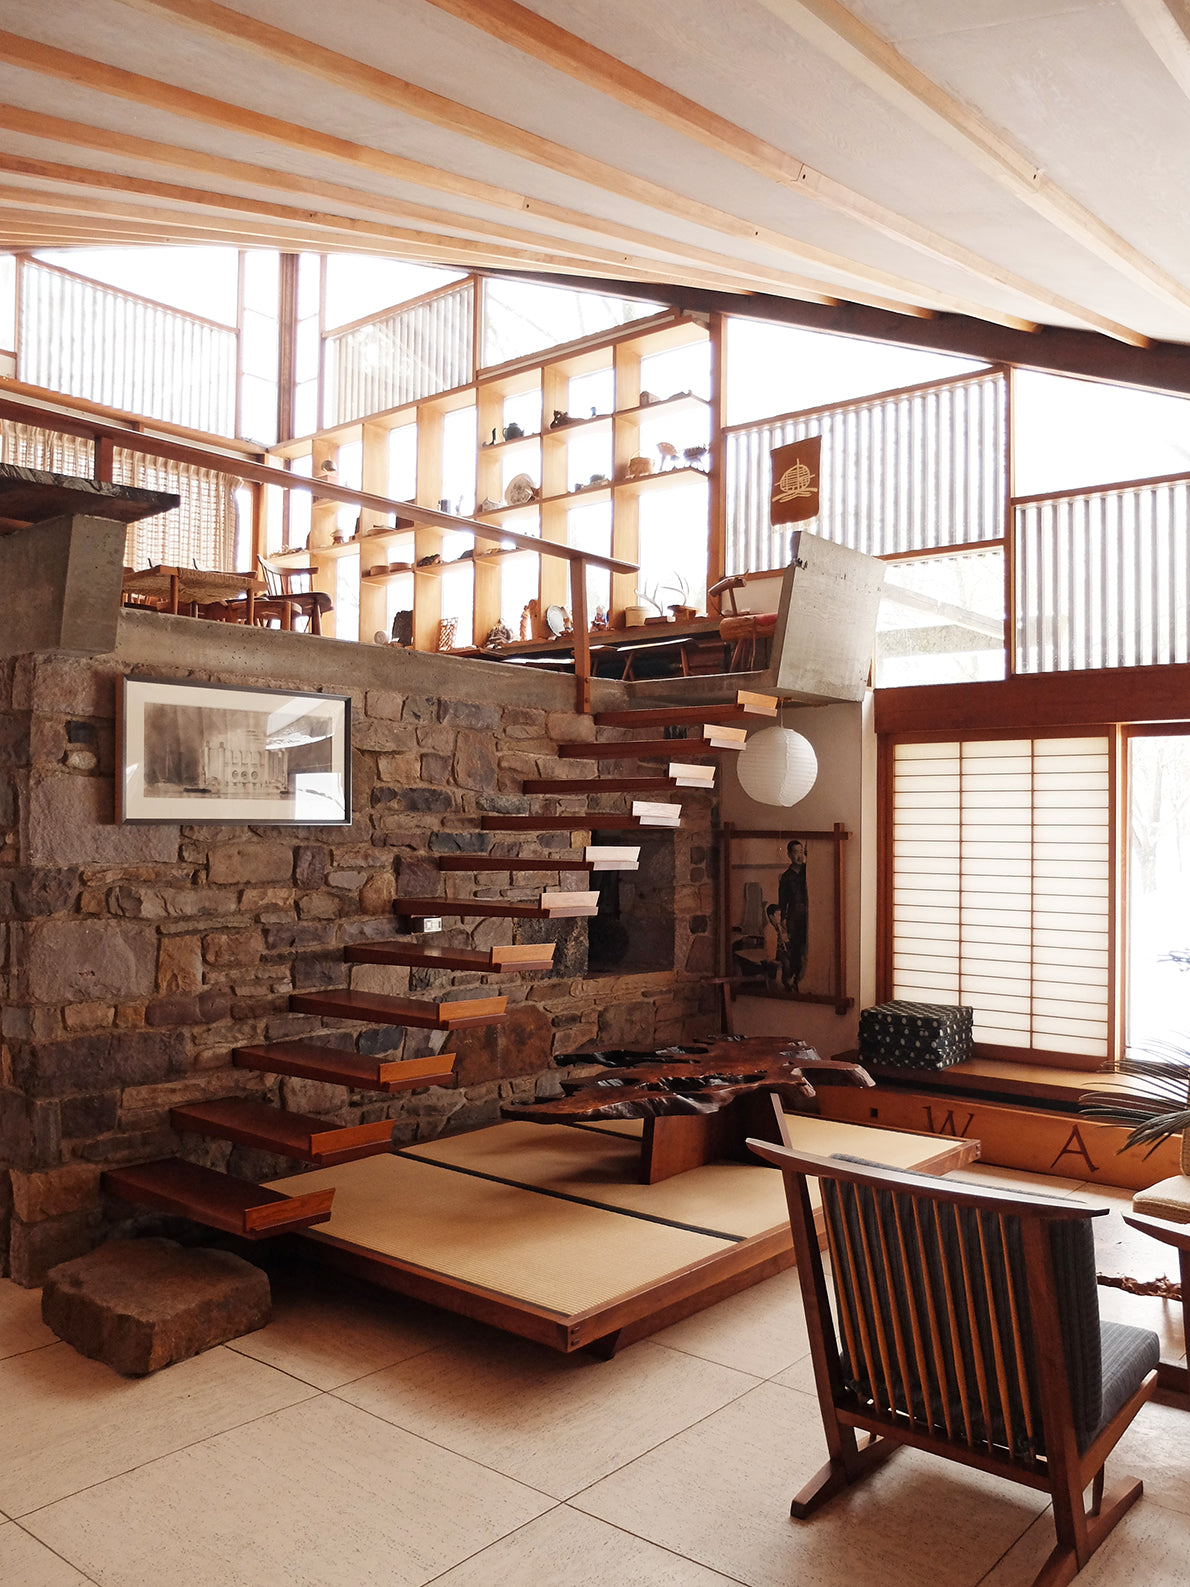 George Nakashima’s Home Is a Timeless Relic To Modernism, photo by Adam Štěch